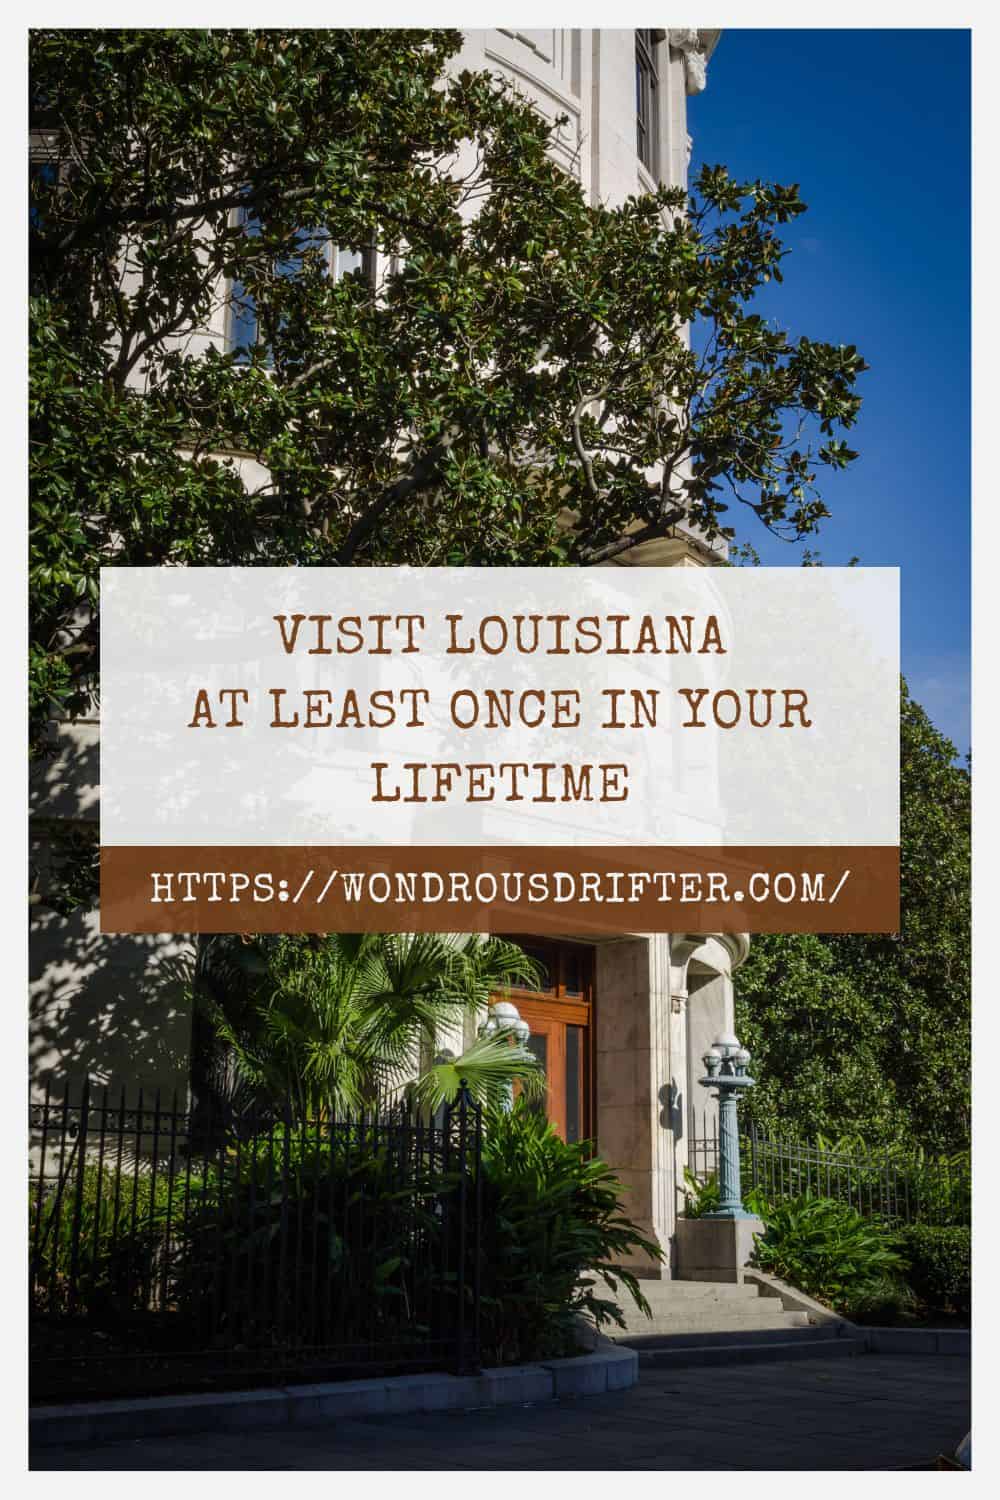 Visit Louisiana at least once in your lifetime